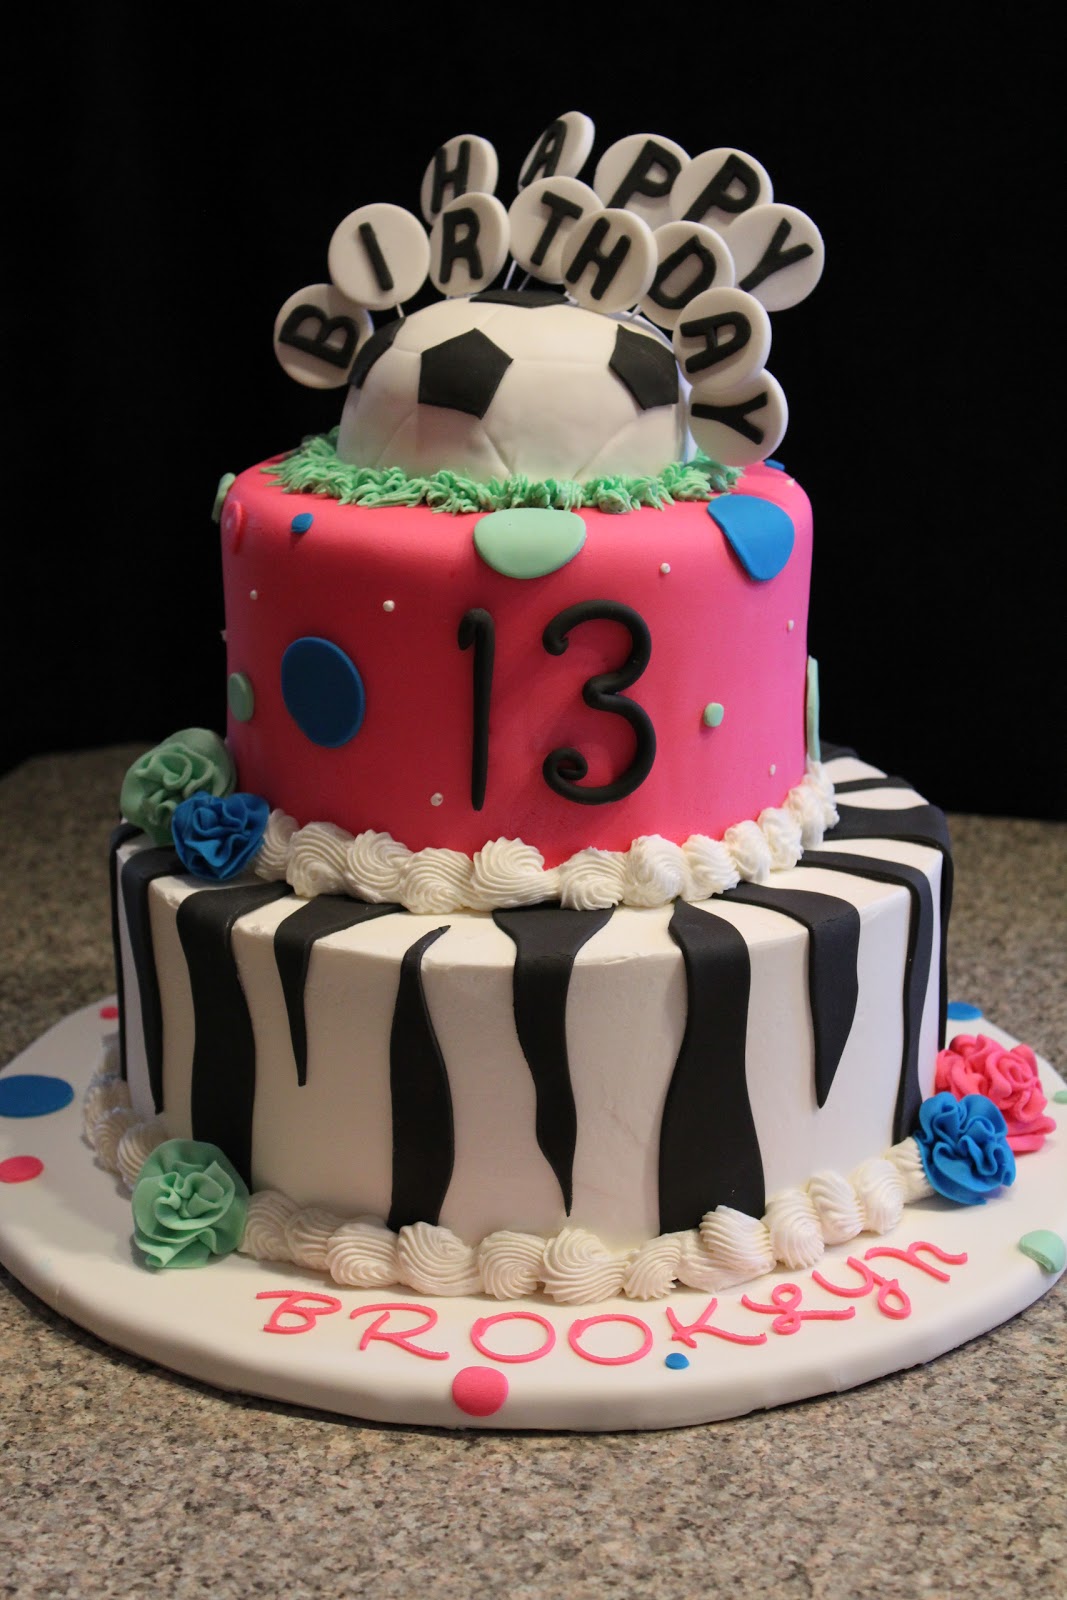 The Best Ideas for 13th Birthday Cake Home, Family, Style and Art Ideas